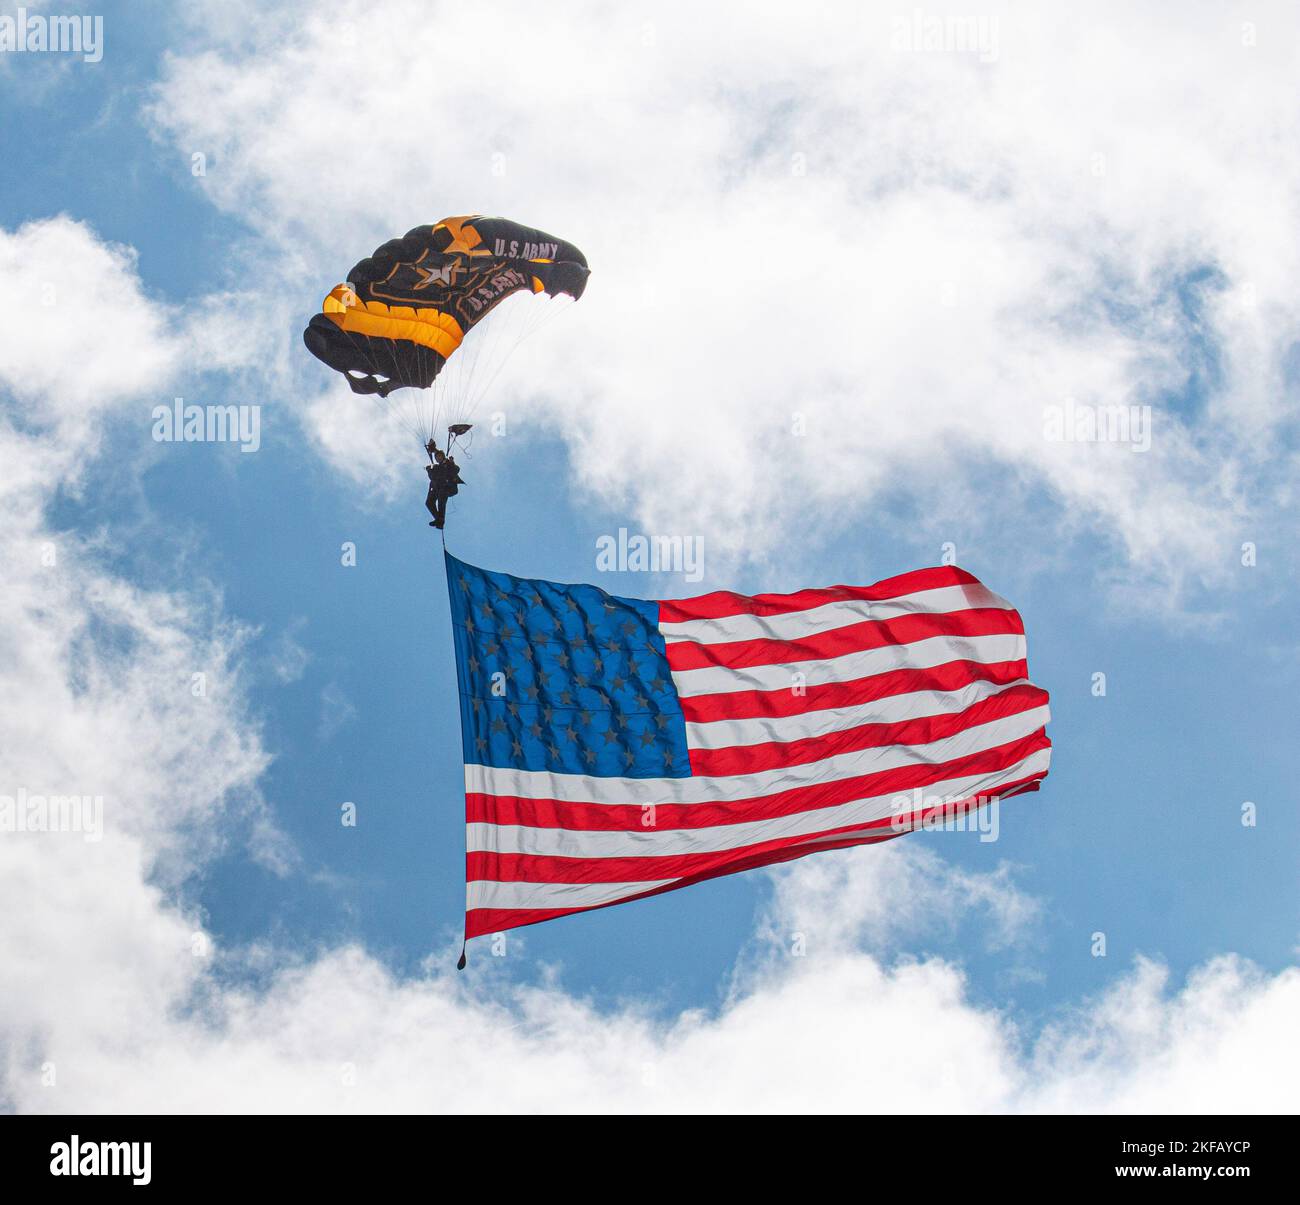 Farmingdale, New York, USA - 26 May 2022: A United States Army paratrooper on the Golden Nights Team opens up the airshow parachuting down to the grou Stock Photo